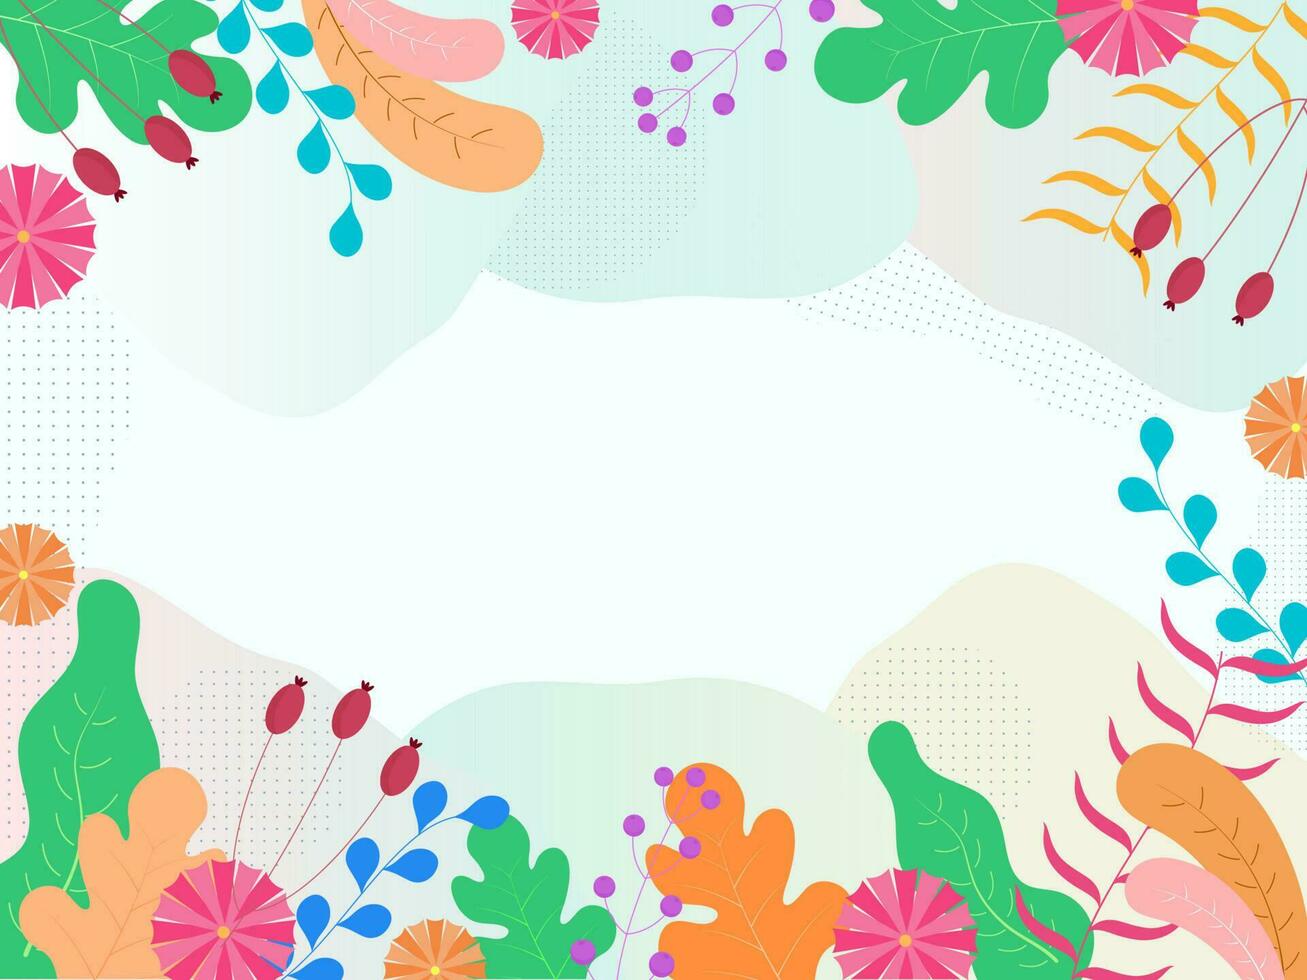 Colorful Flowers, Leaves and Berry Branches Decorated Border on Abstract Background. vector